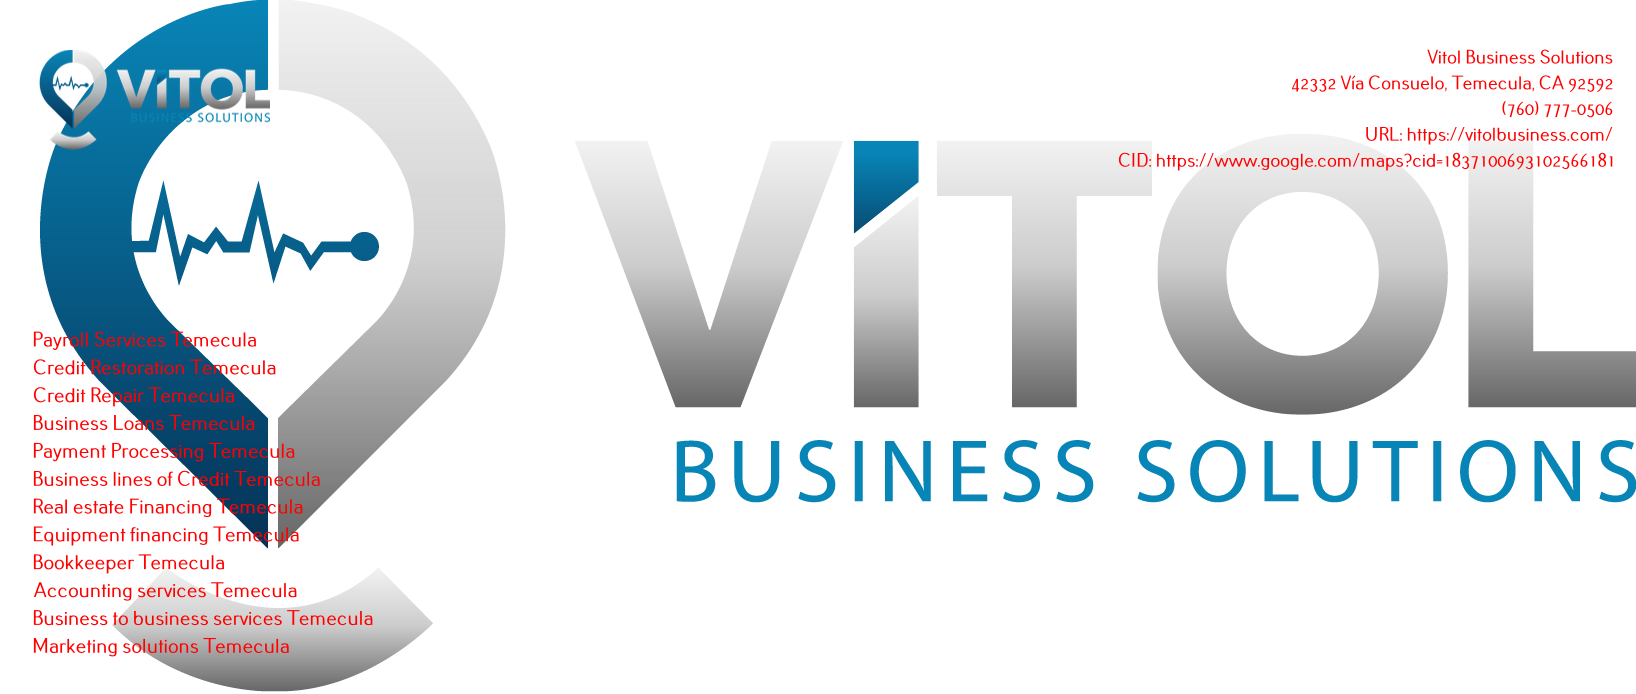 Vitol Business Solutions